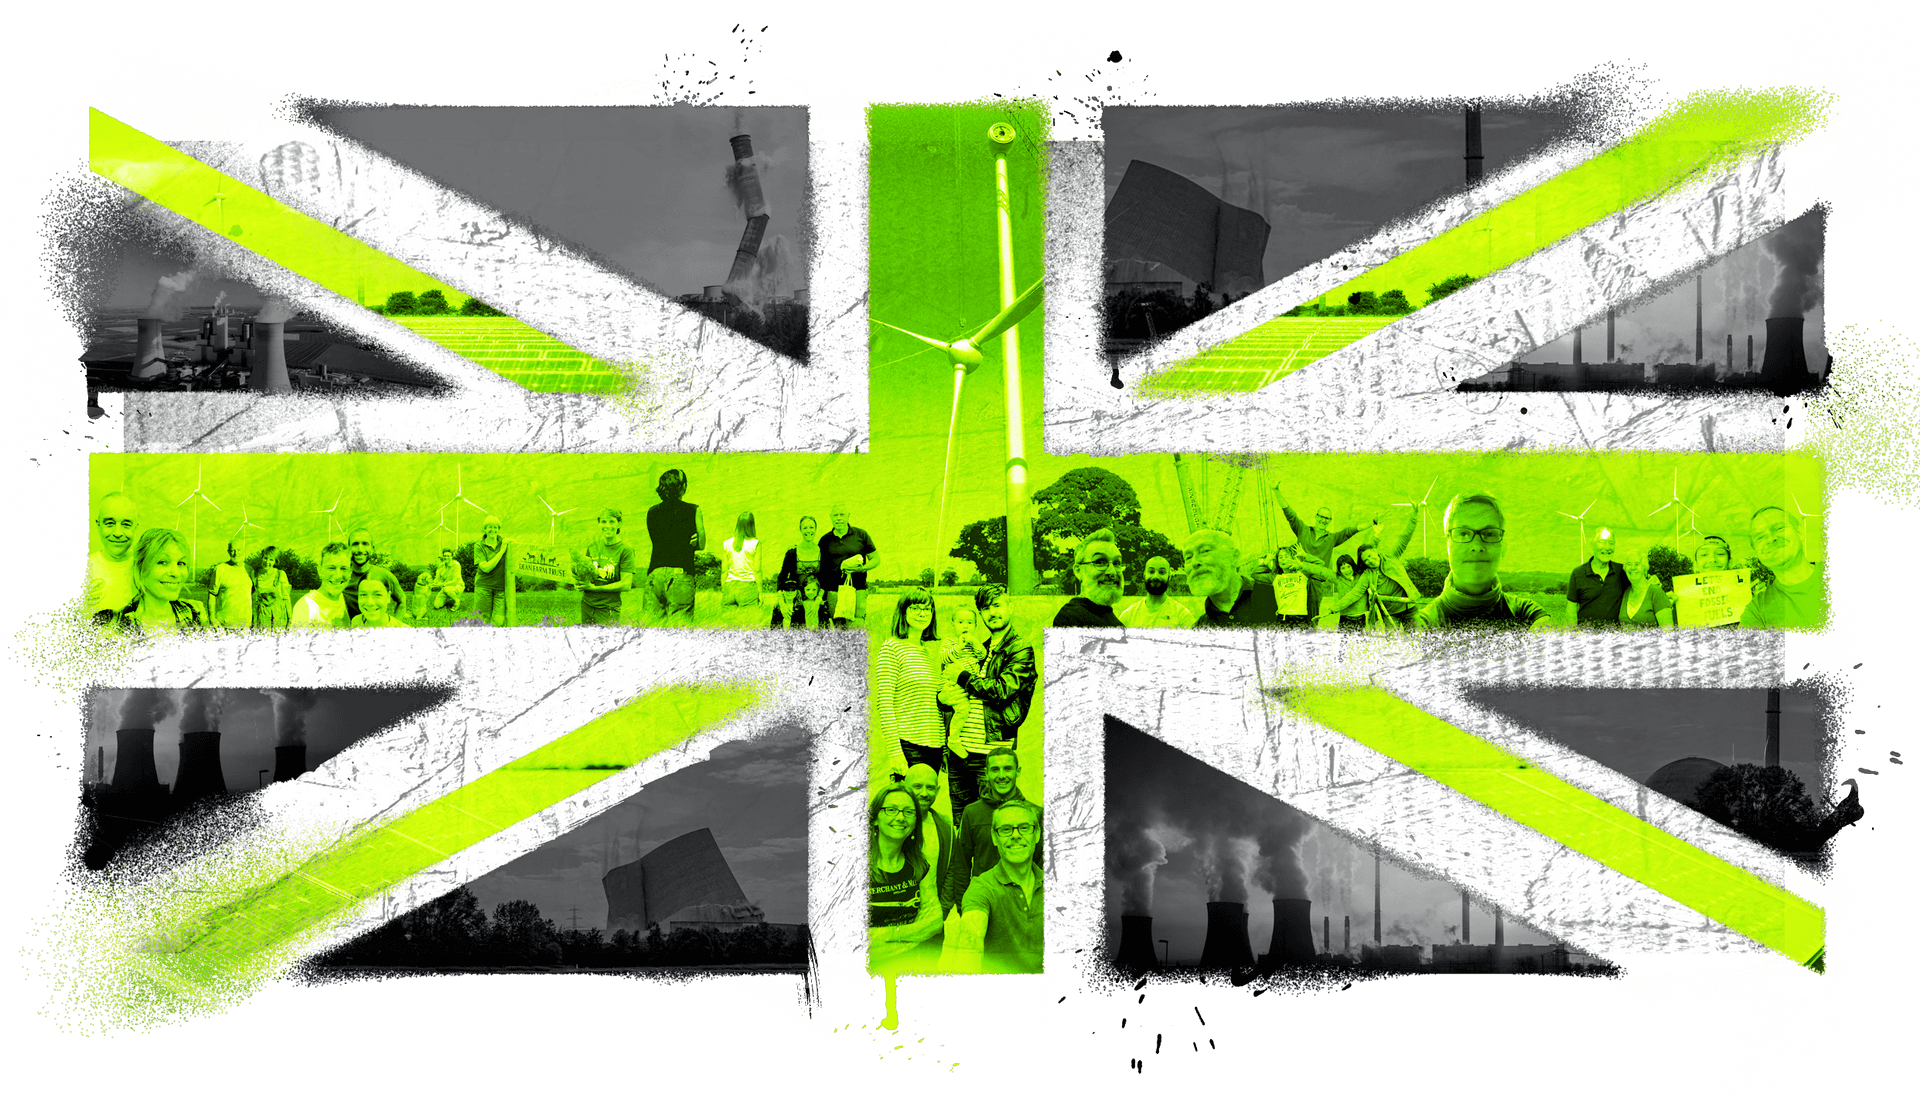 Union Jack in Ecotricity green with people vs. fossil fuels